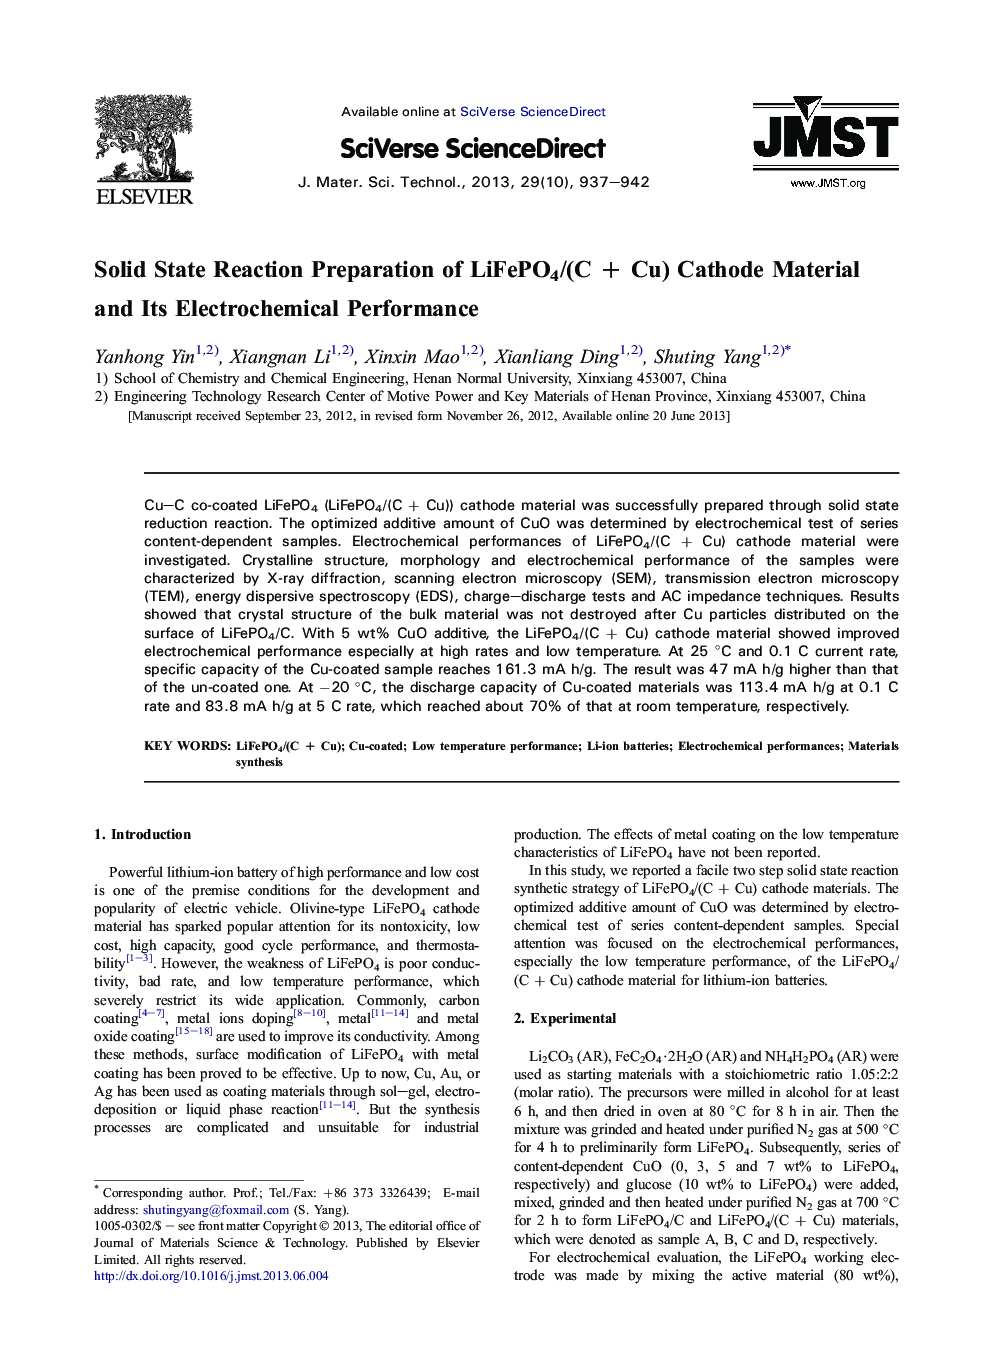 Solid State Reaction Preparation of LiFePO4/(C + Cu) Cathode Material and Its Electrochemical Performance